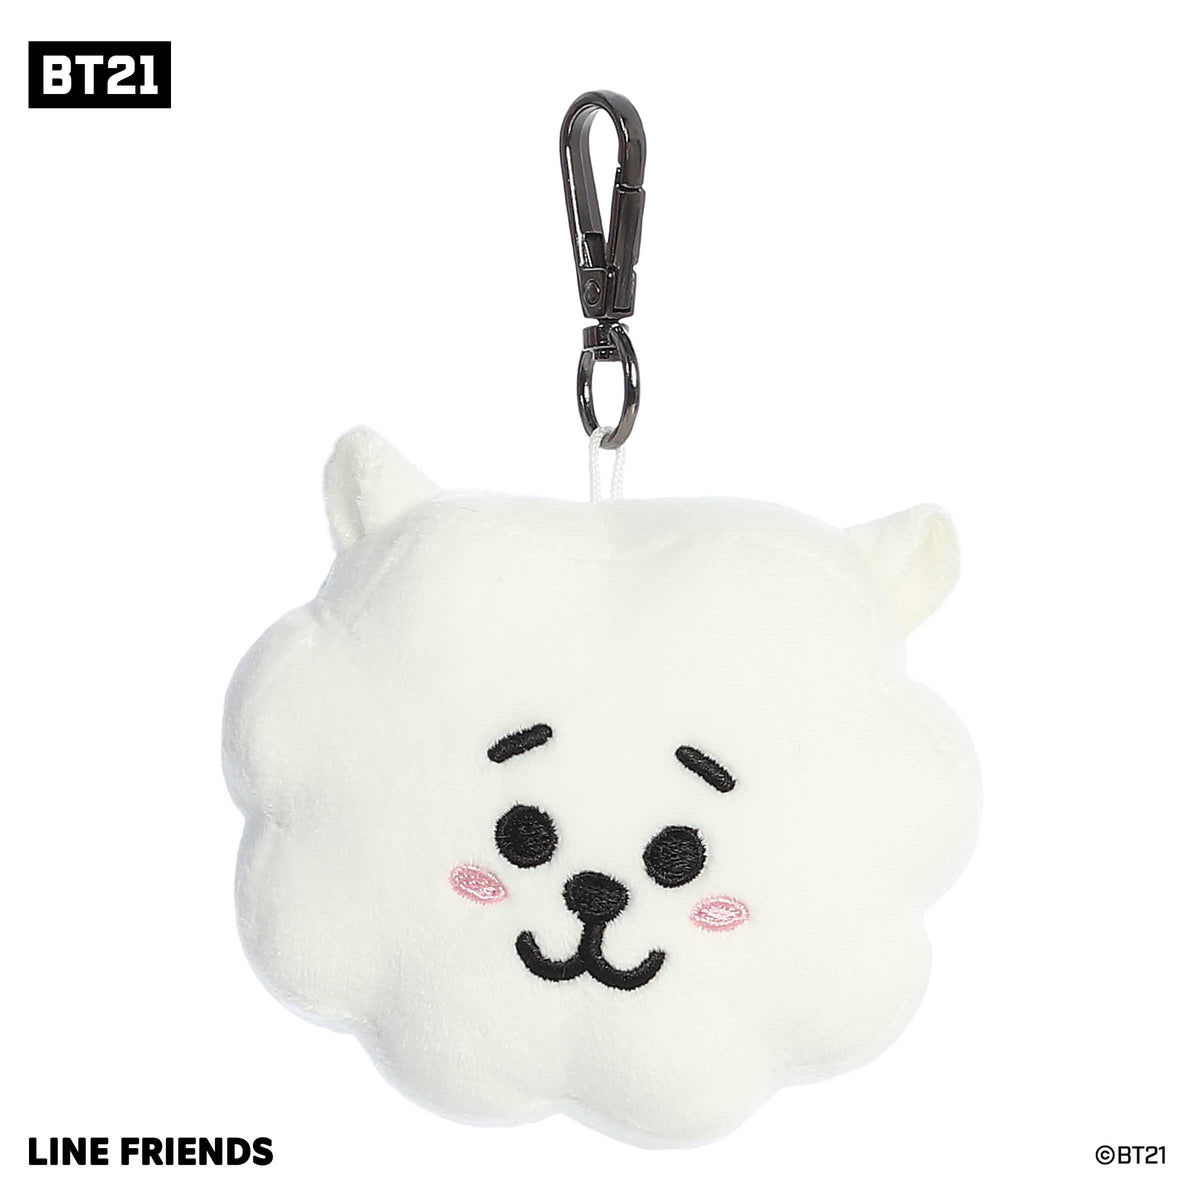 Cute BT21 plush Clip-On with a round white fluffy soft body, smiling face with black accents, and an attached metal hook